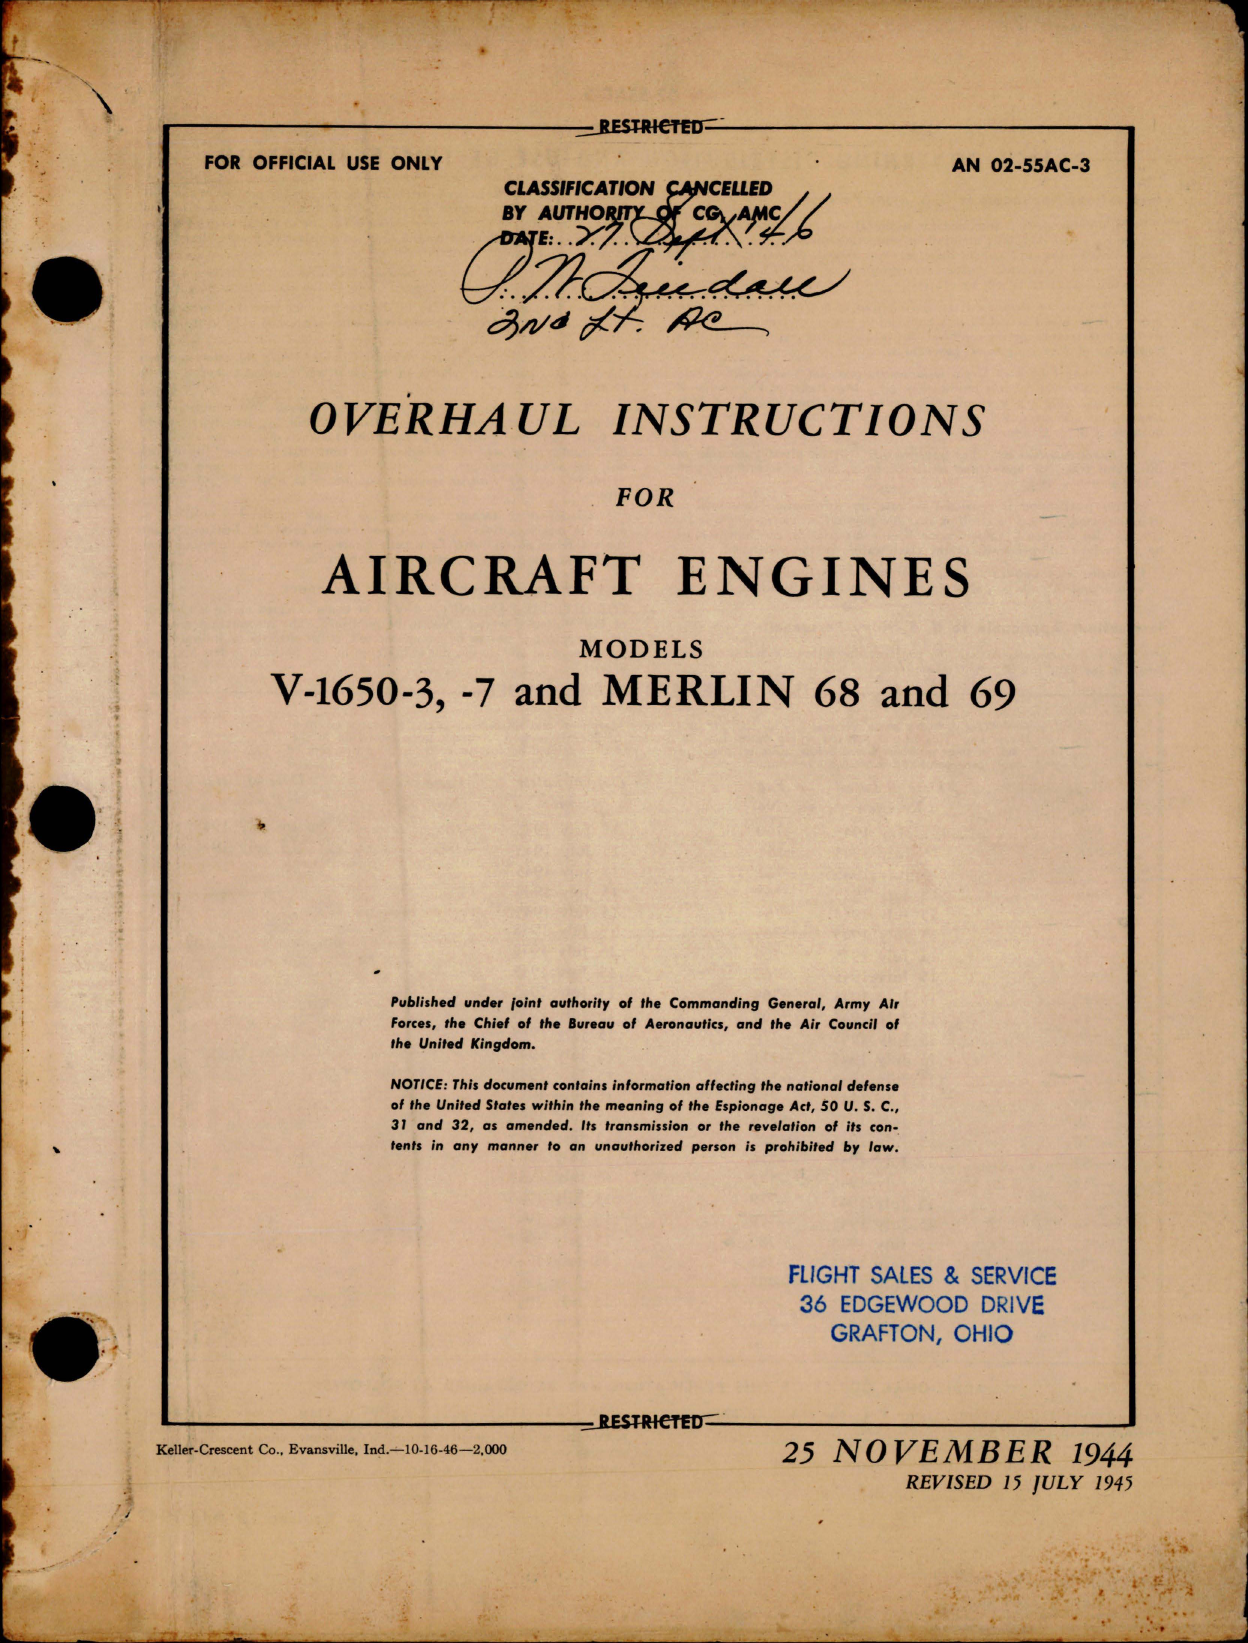 Sample page 1 from AirCorps Library document: Overhaul Instructions for Aircraft Engines - V-1650-3, V-1650-7, Merlin 68 and 69